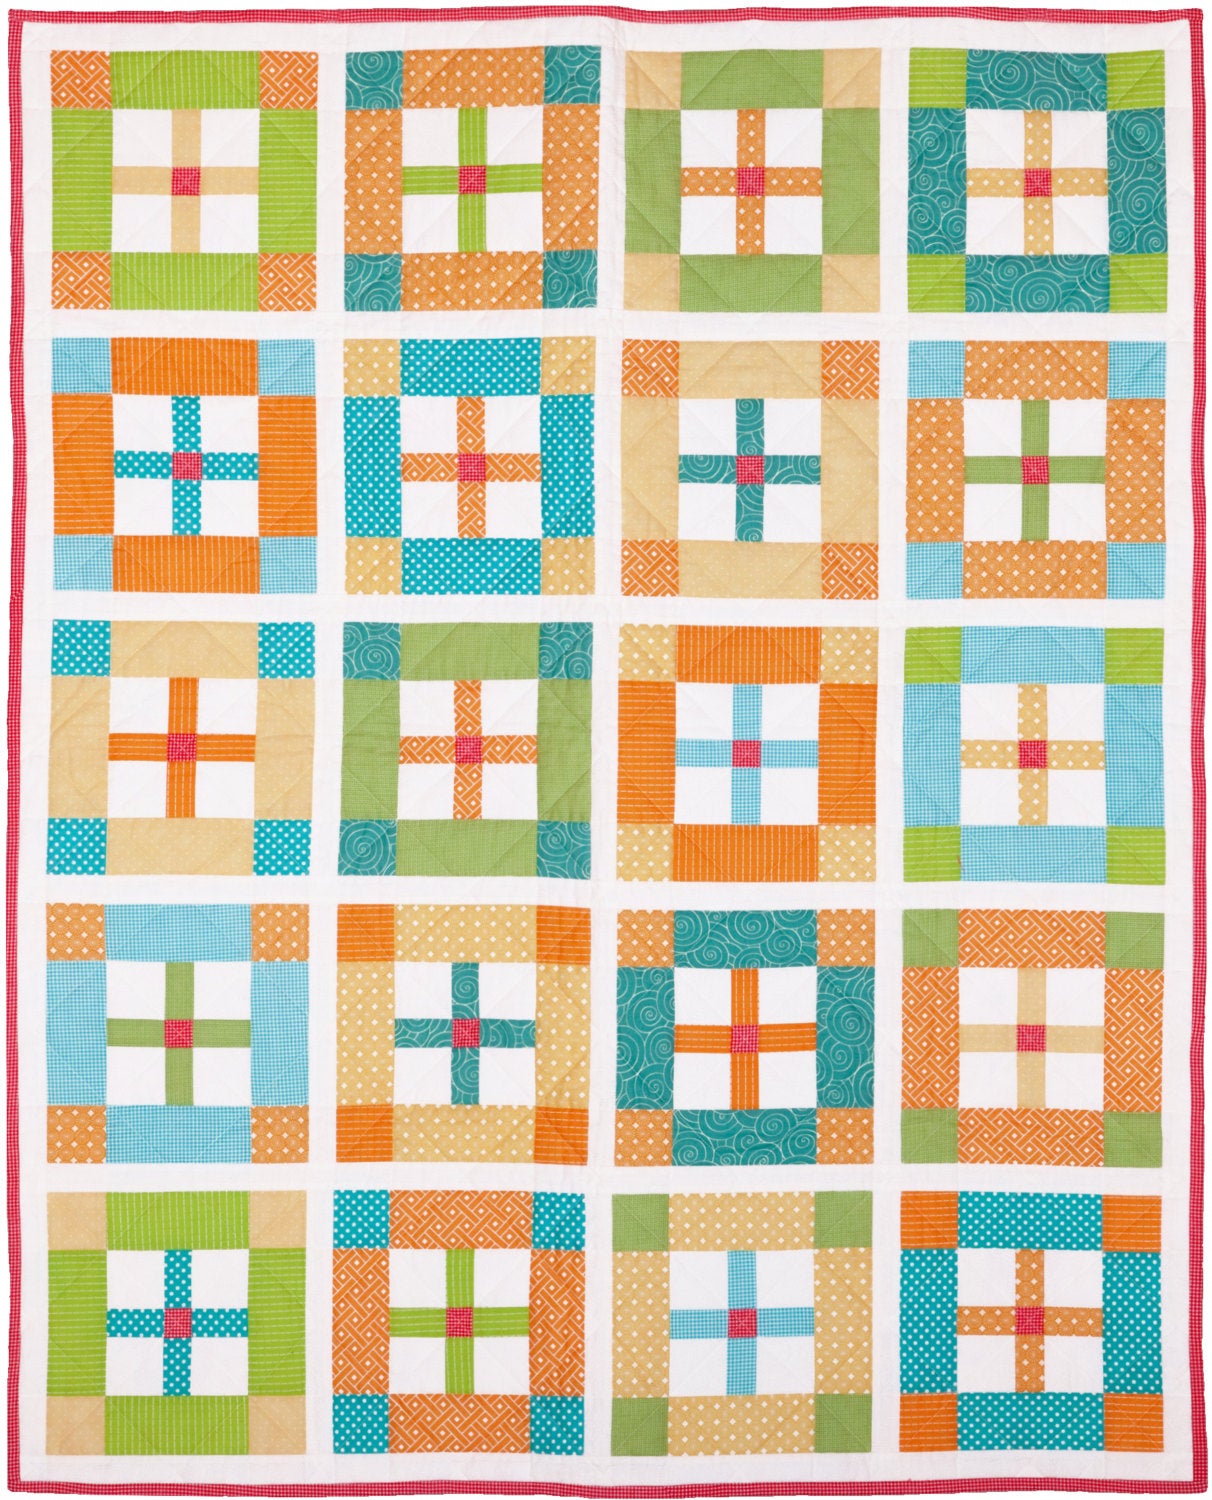 Angus's Cot Quilt Pattern - PDF